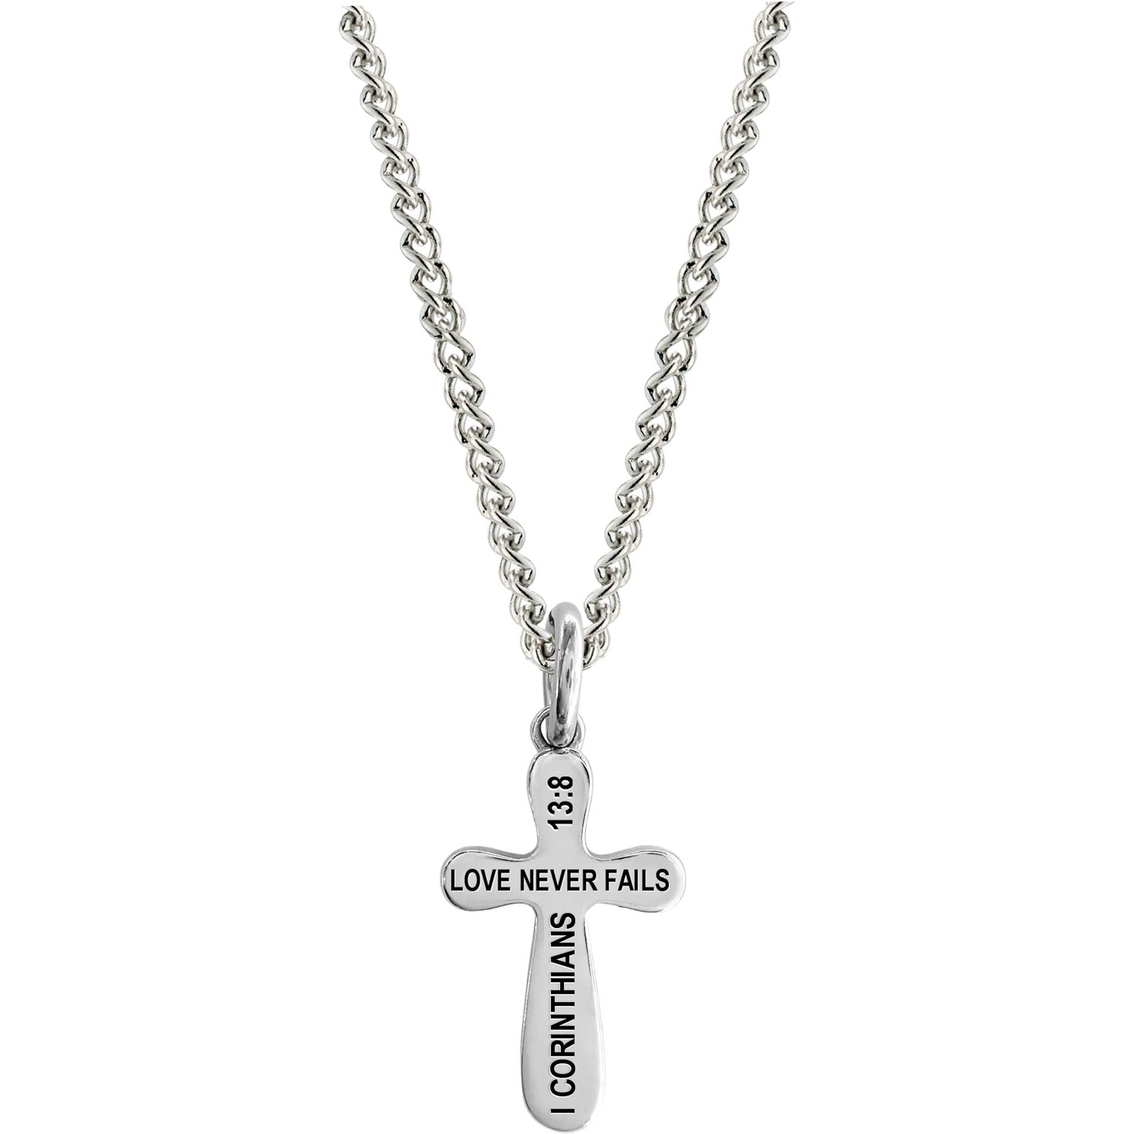 Shields of Strength Stainless Army Wife Cross 1 Corinthians 13:8 Necklace - Image 3 of 3